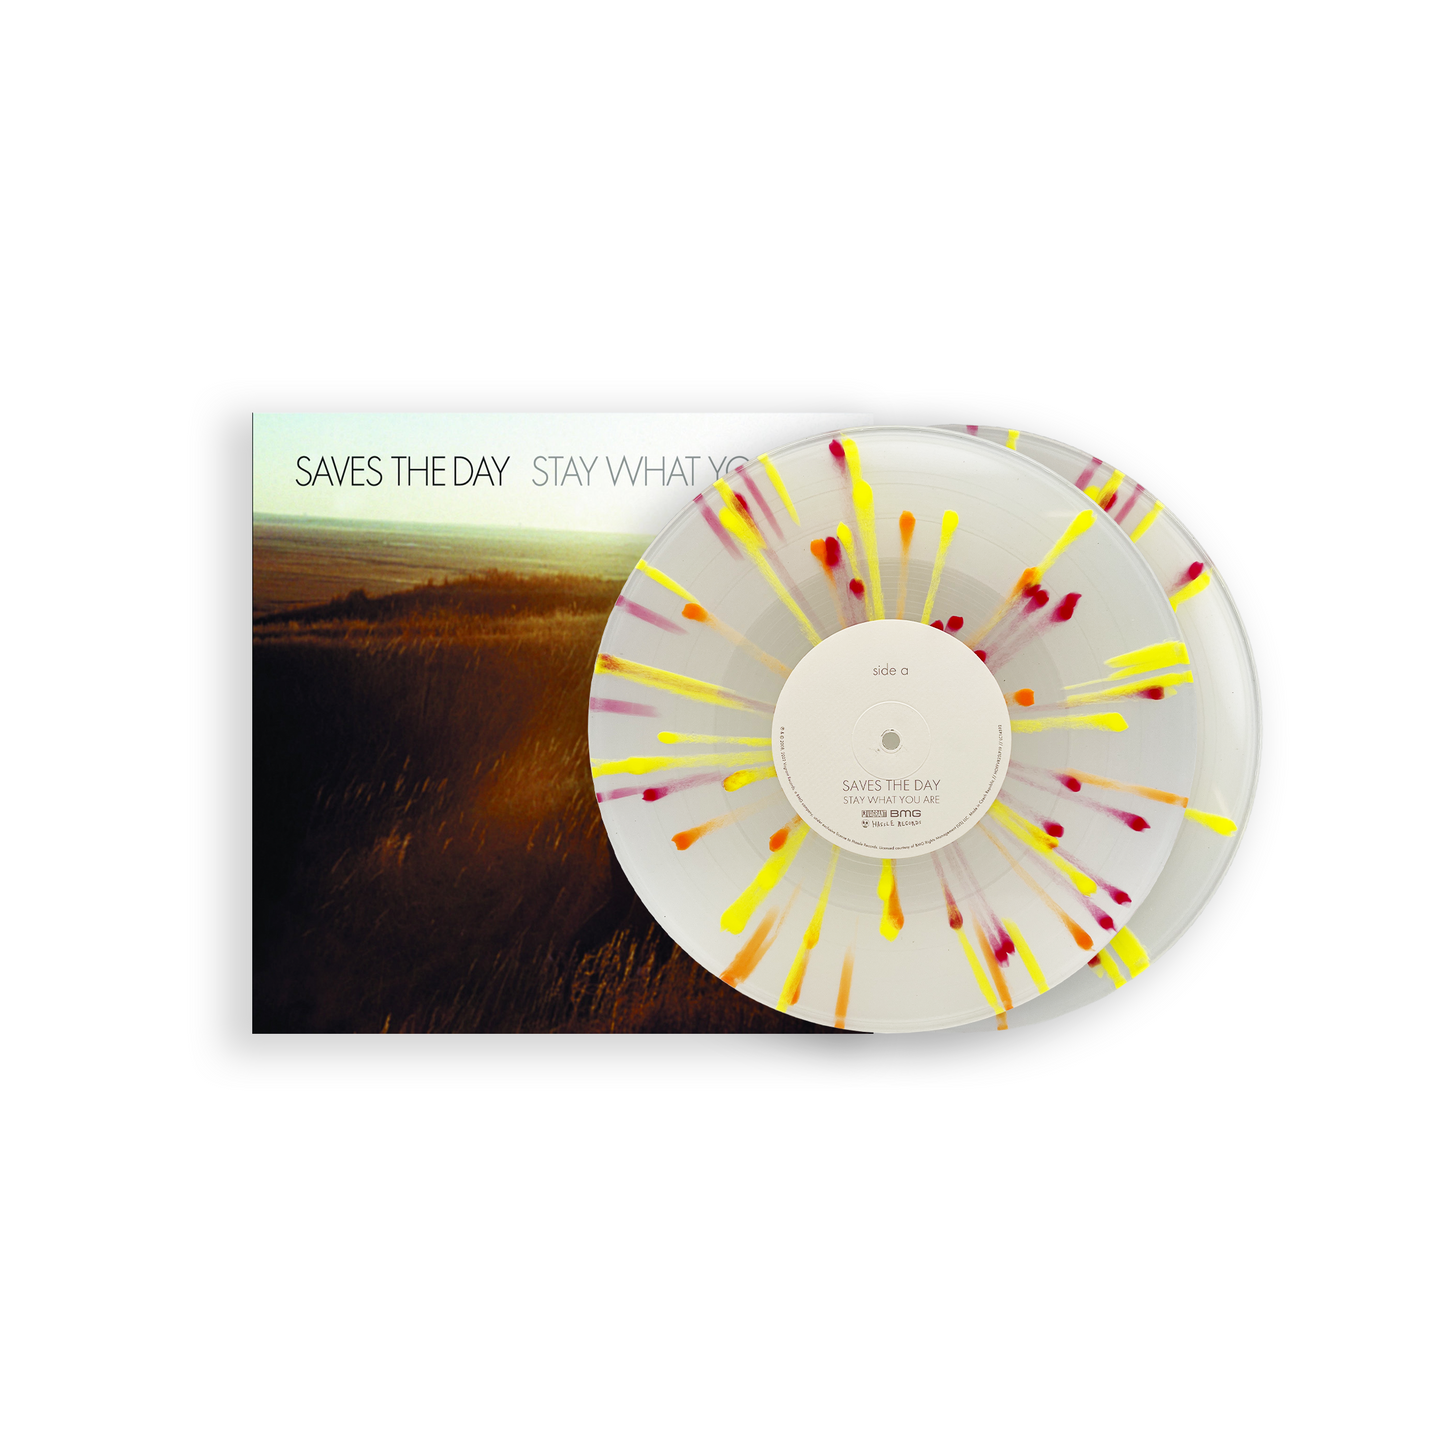 Saves The Day 'Stay What You Are'